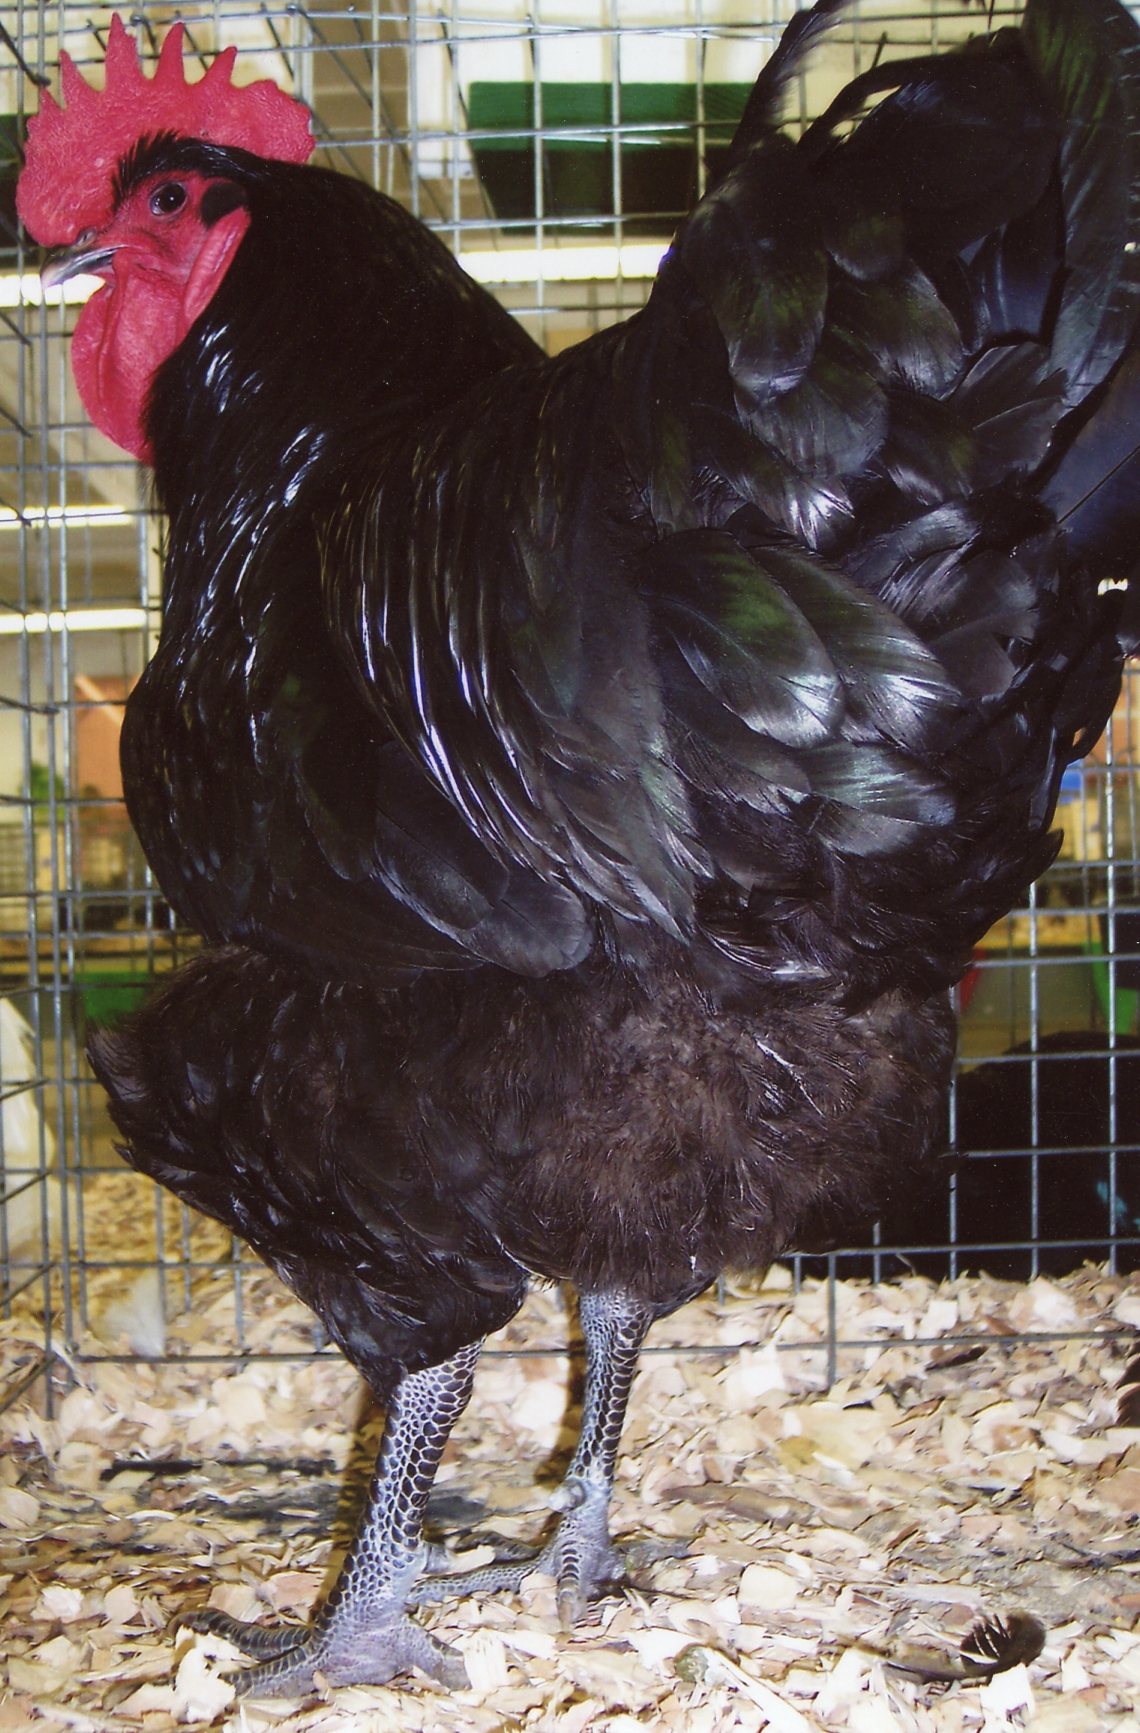 jersey giant chickens for sale near me